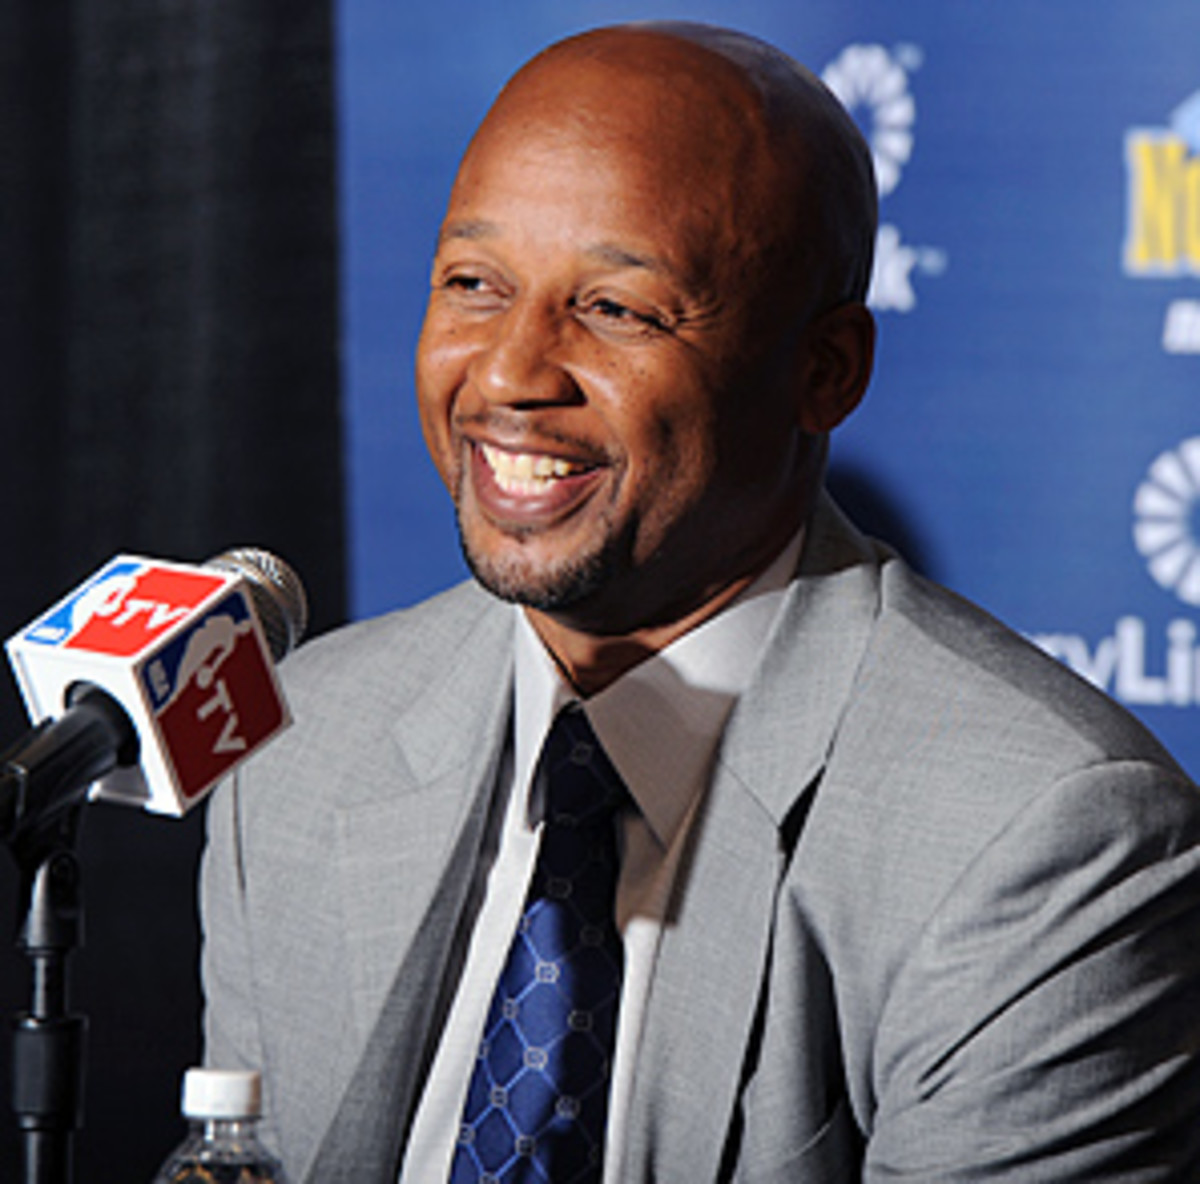 Brian Shaw spent the last two seasons as the Pacers' associate head coach.